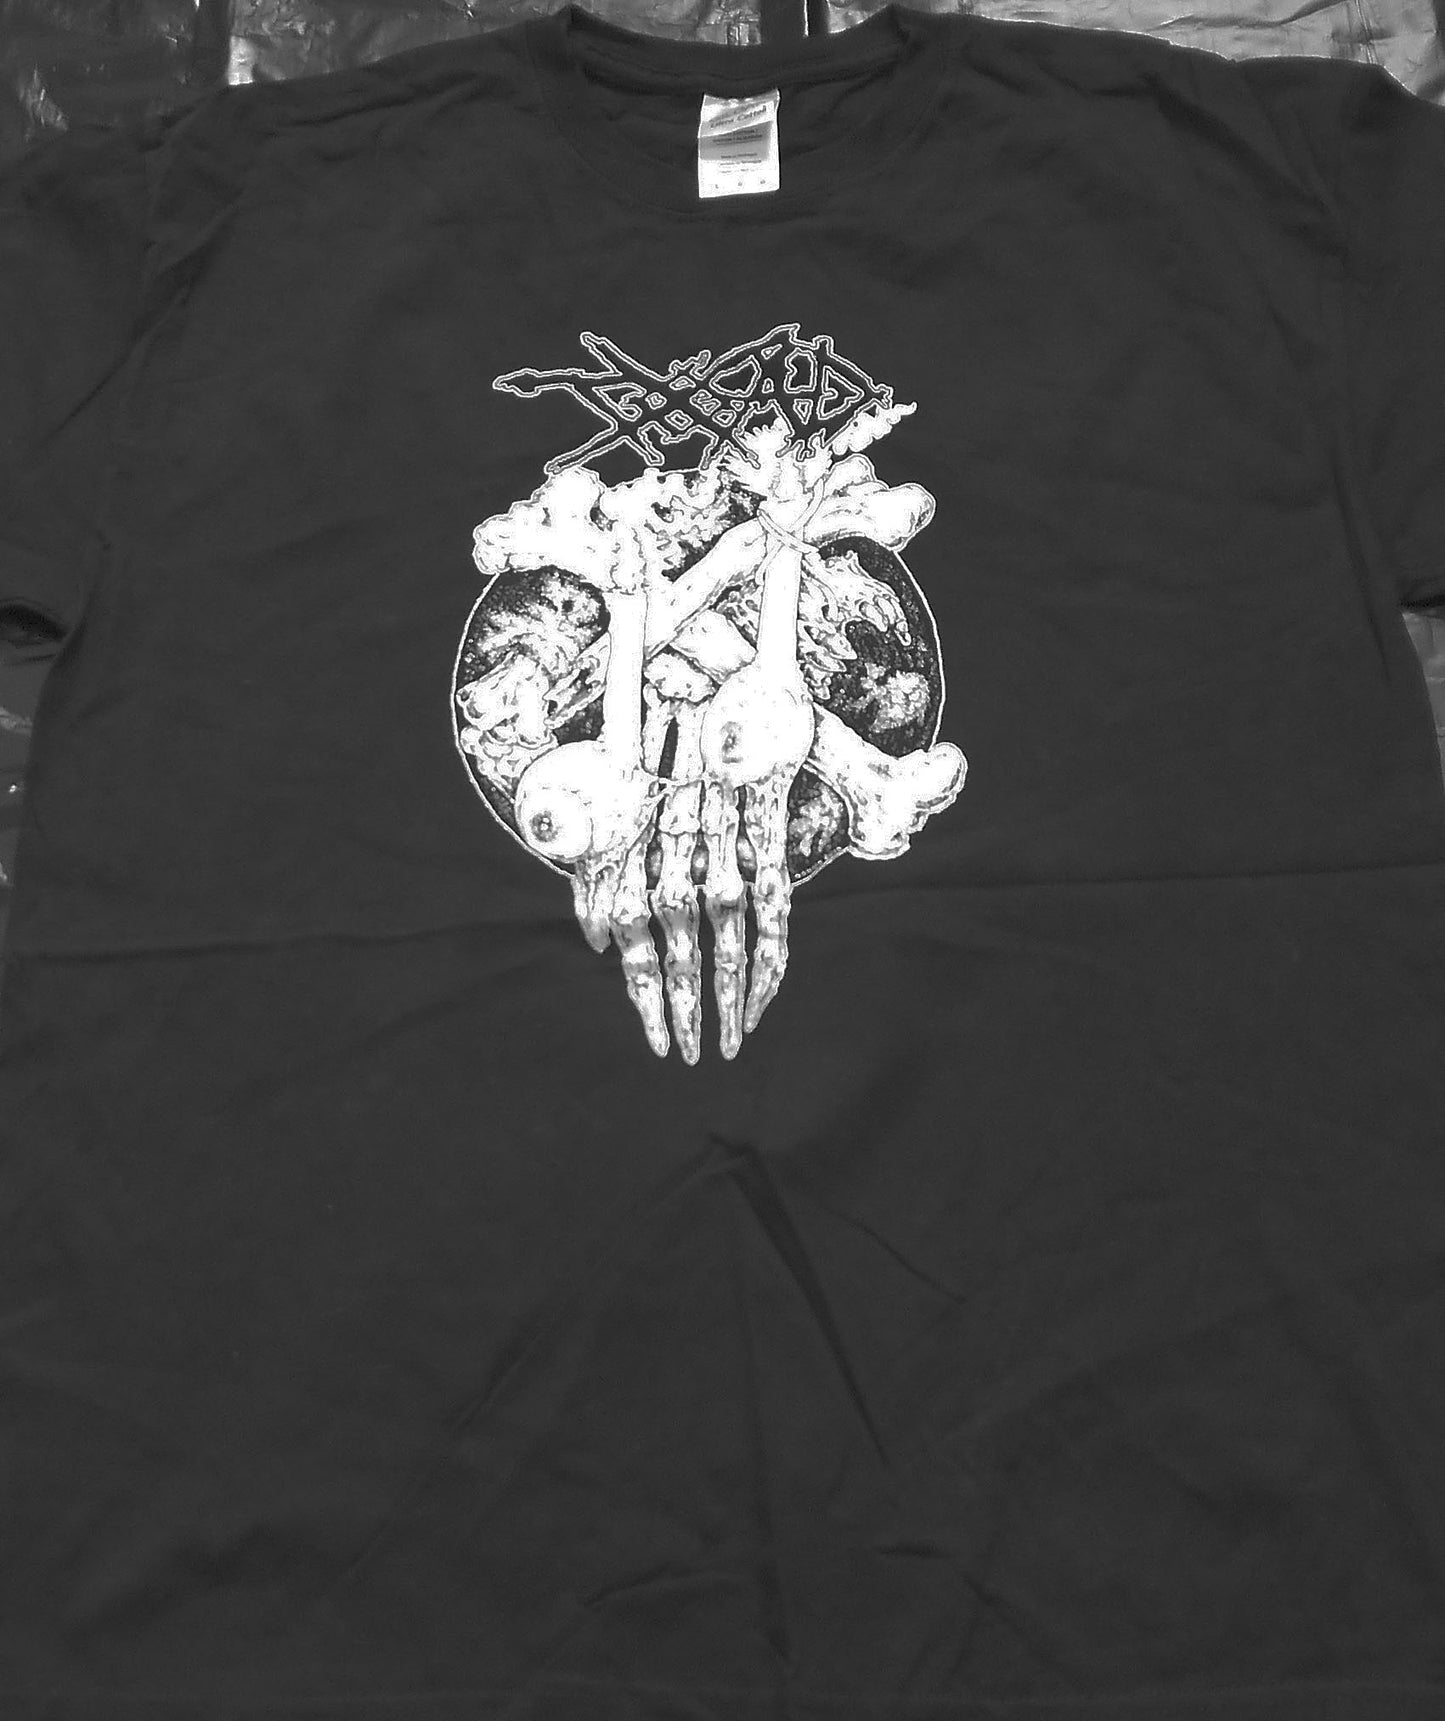 TRUTH OF ALL DEATH - T-shirt